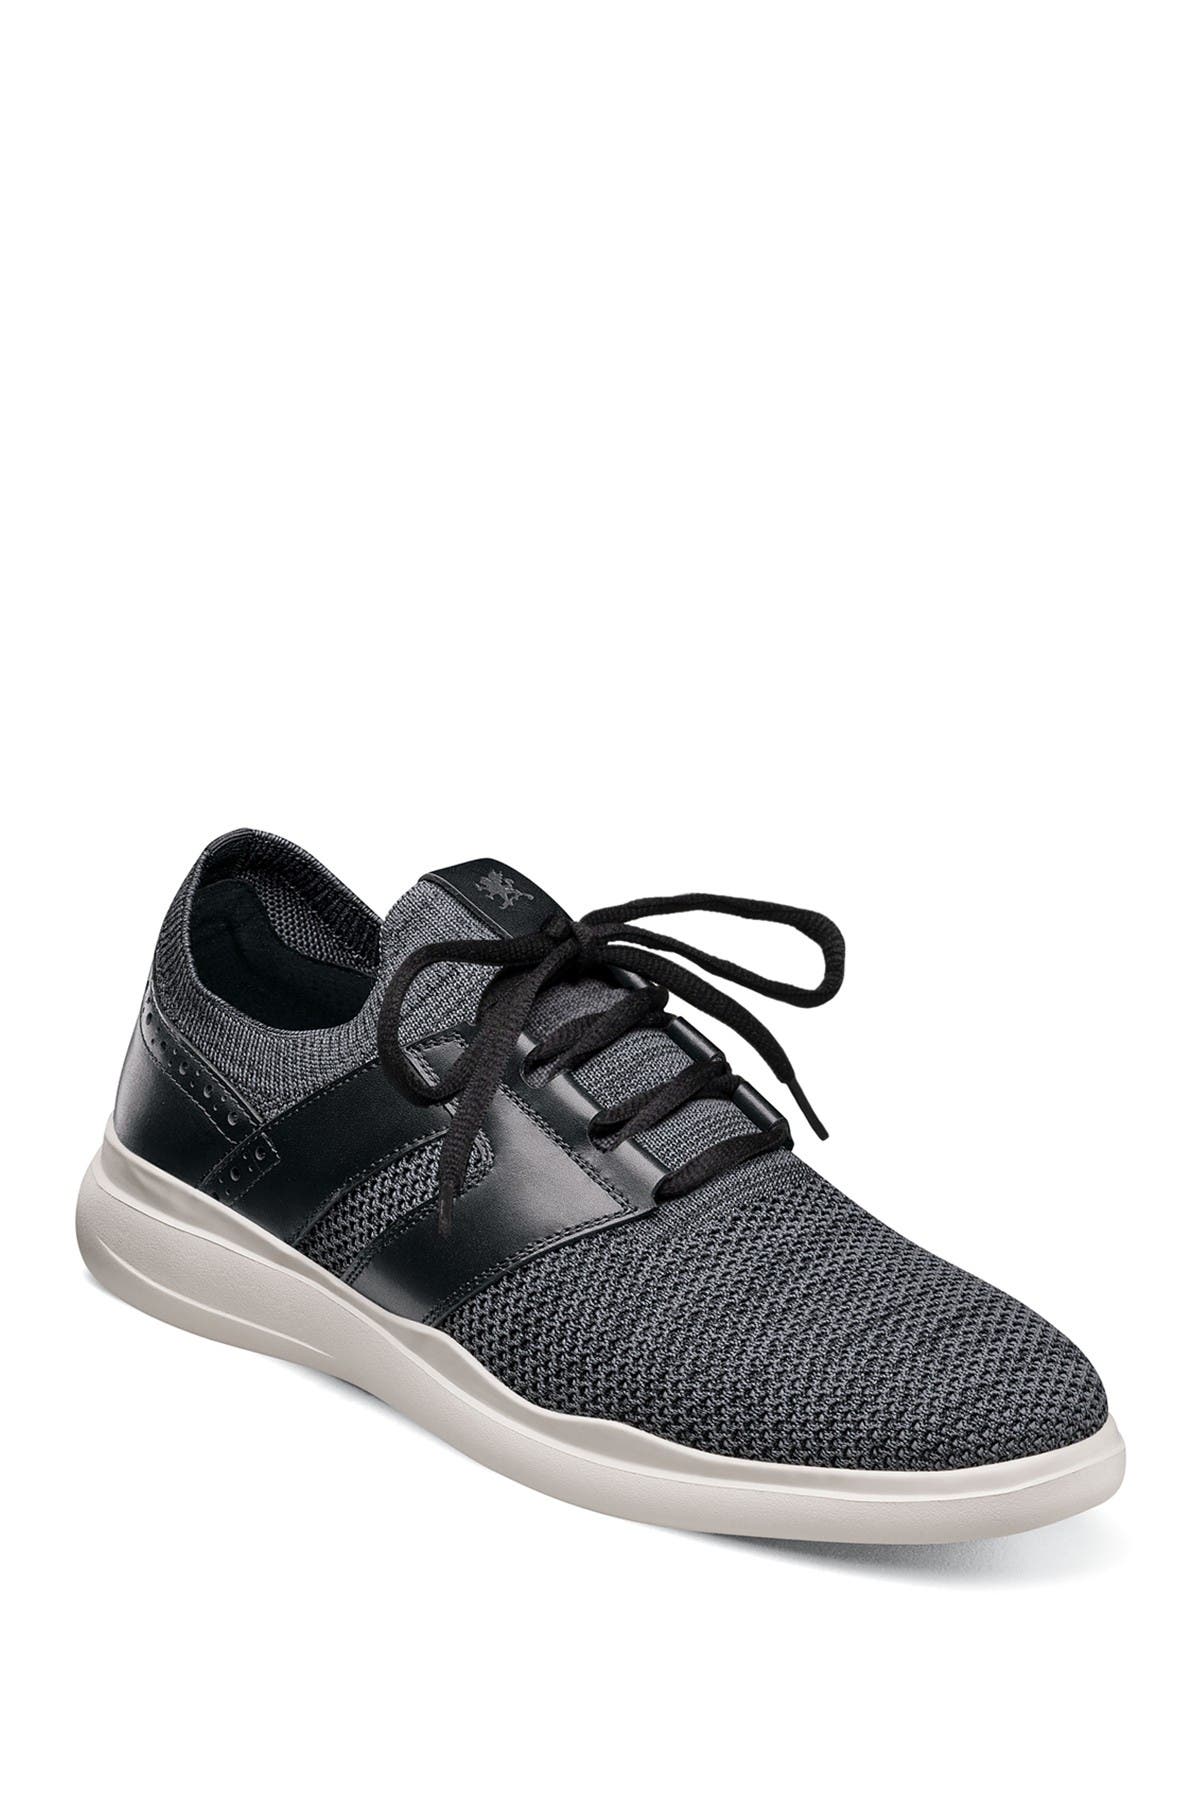 STACY ADAMS MOXLEY KNIT PLAIN TOE LACE-UP SNEAKER,793926124386